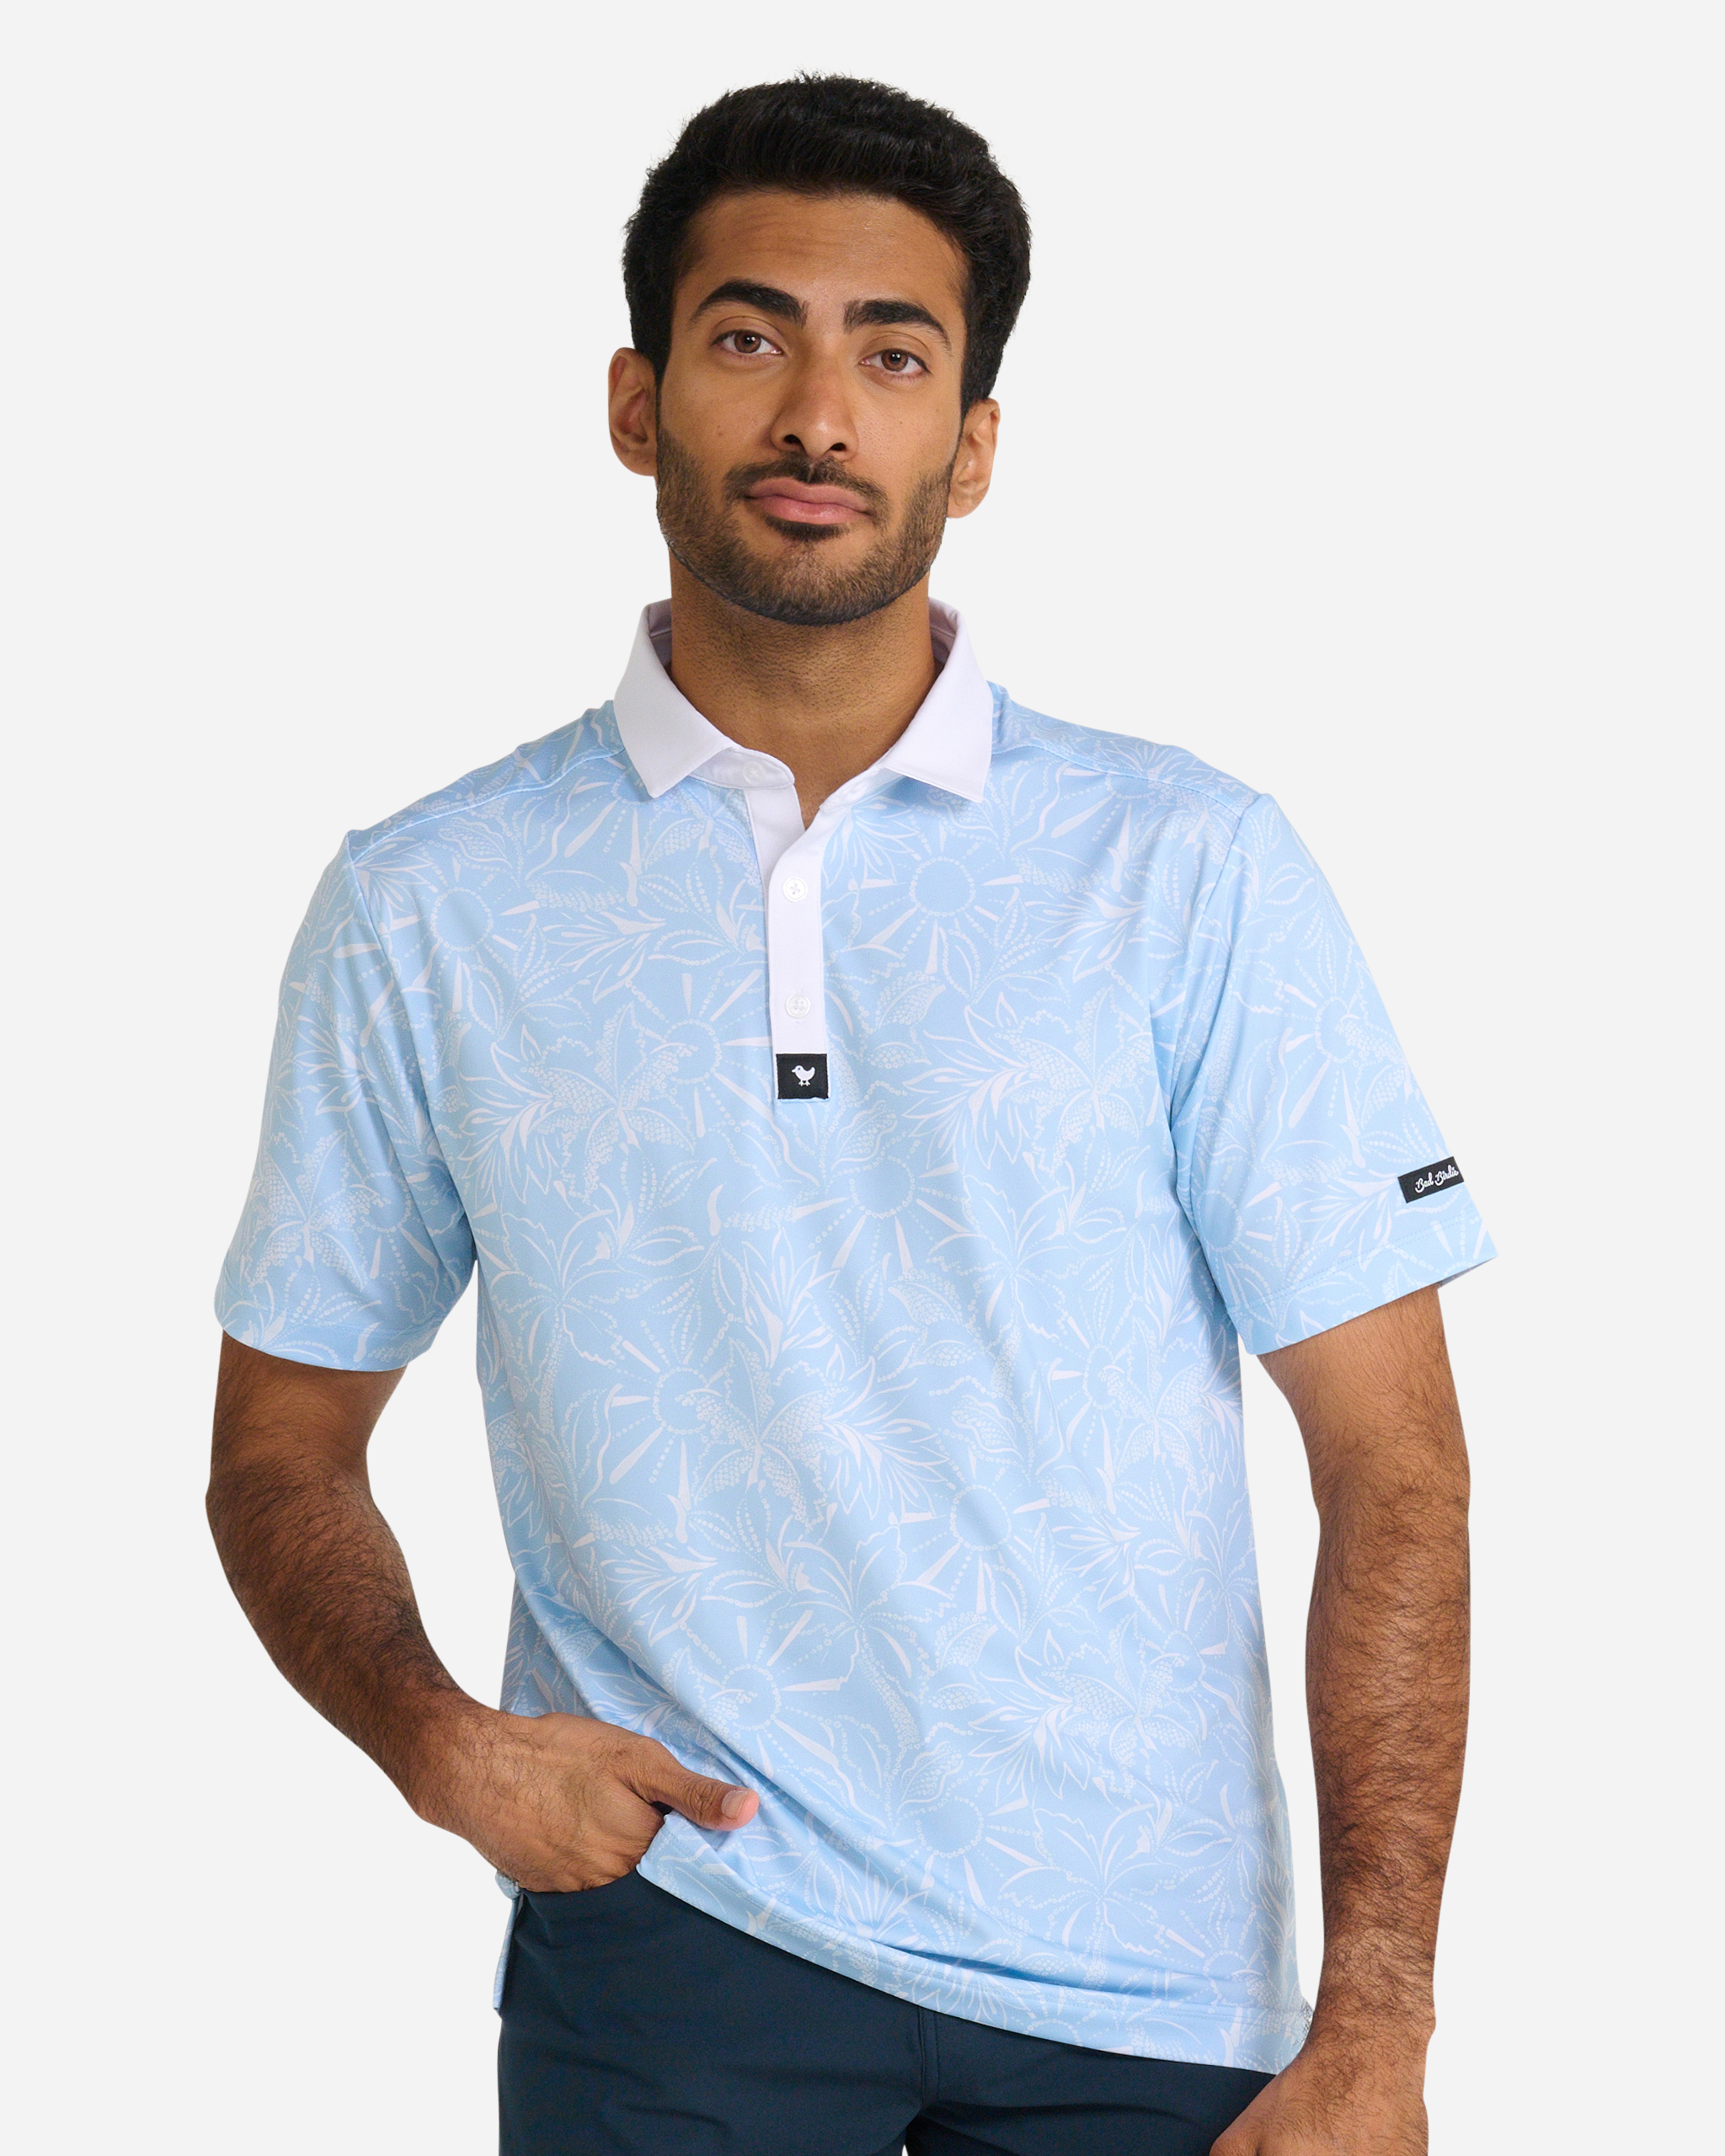 Golf Shirts  Golf Polo Shirts at the Lowest UK Prices - Clubhouse